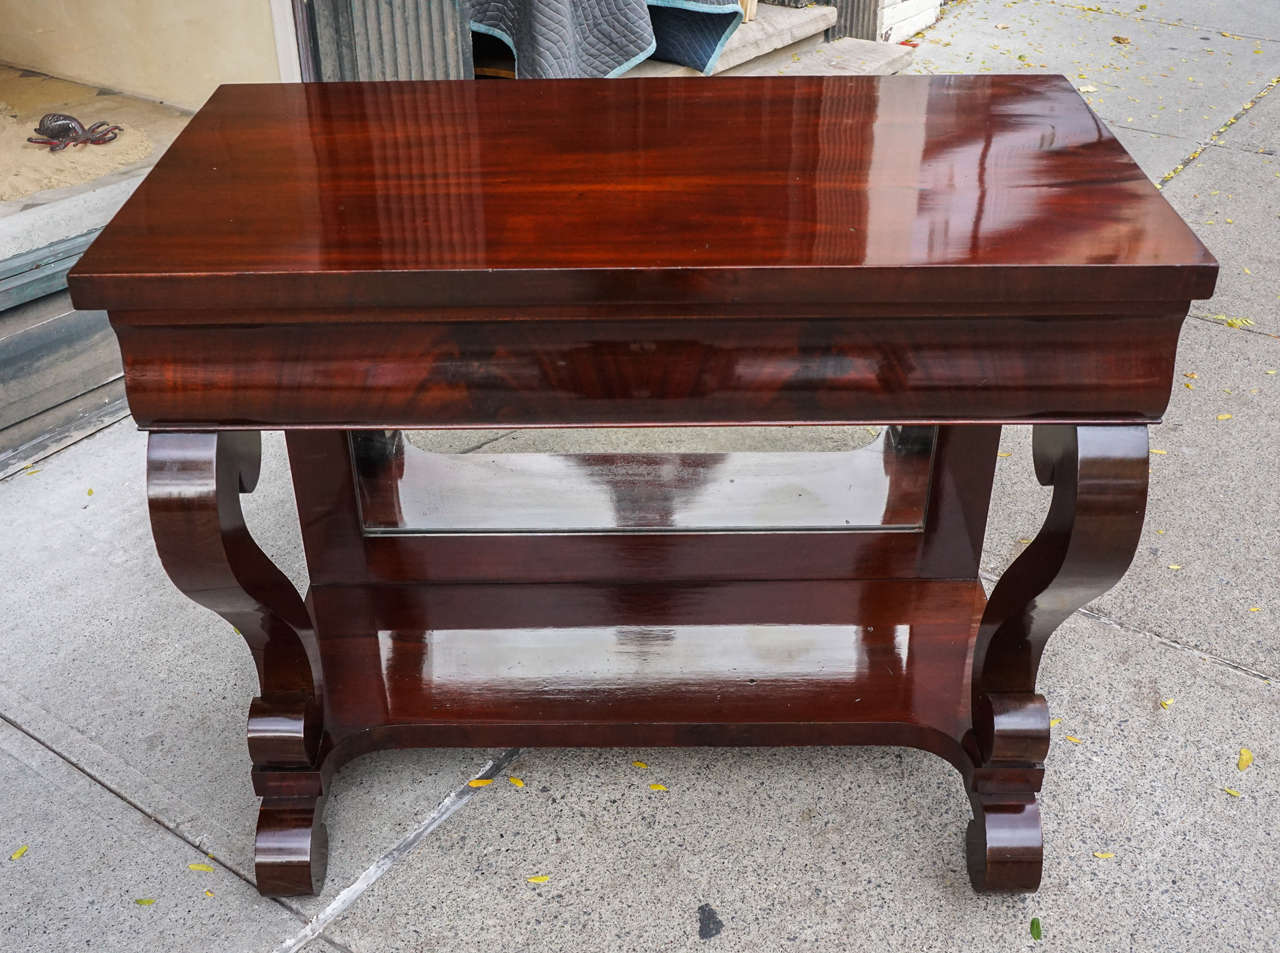 This robust and dramatic table designed for use between a pair of windows in grand Greek revival country homes in America was a standard design element in its time. Made of expensive and hard to get imported mahogany with pine secondary’s. The large